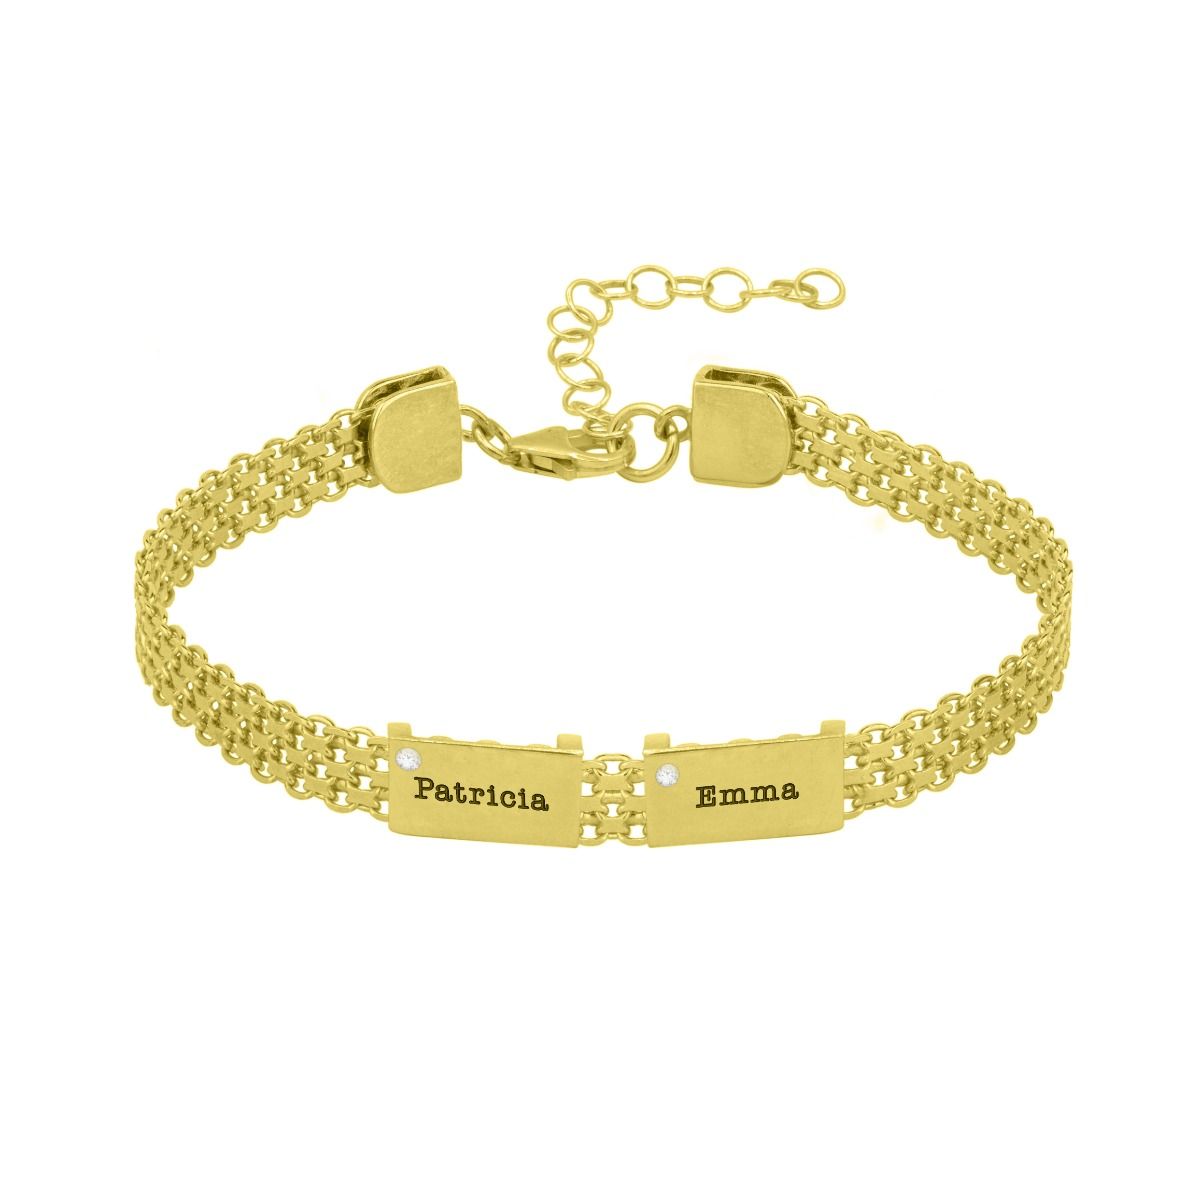 Christmas Gift for Her - Name Bracelet with Capital Letters in 18K Gold Vermeil